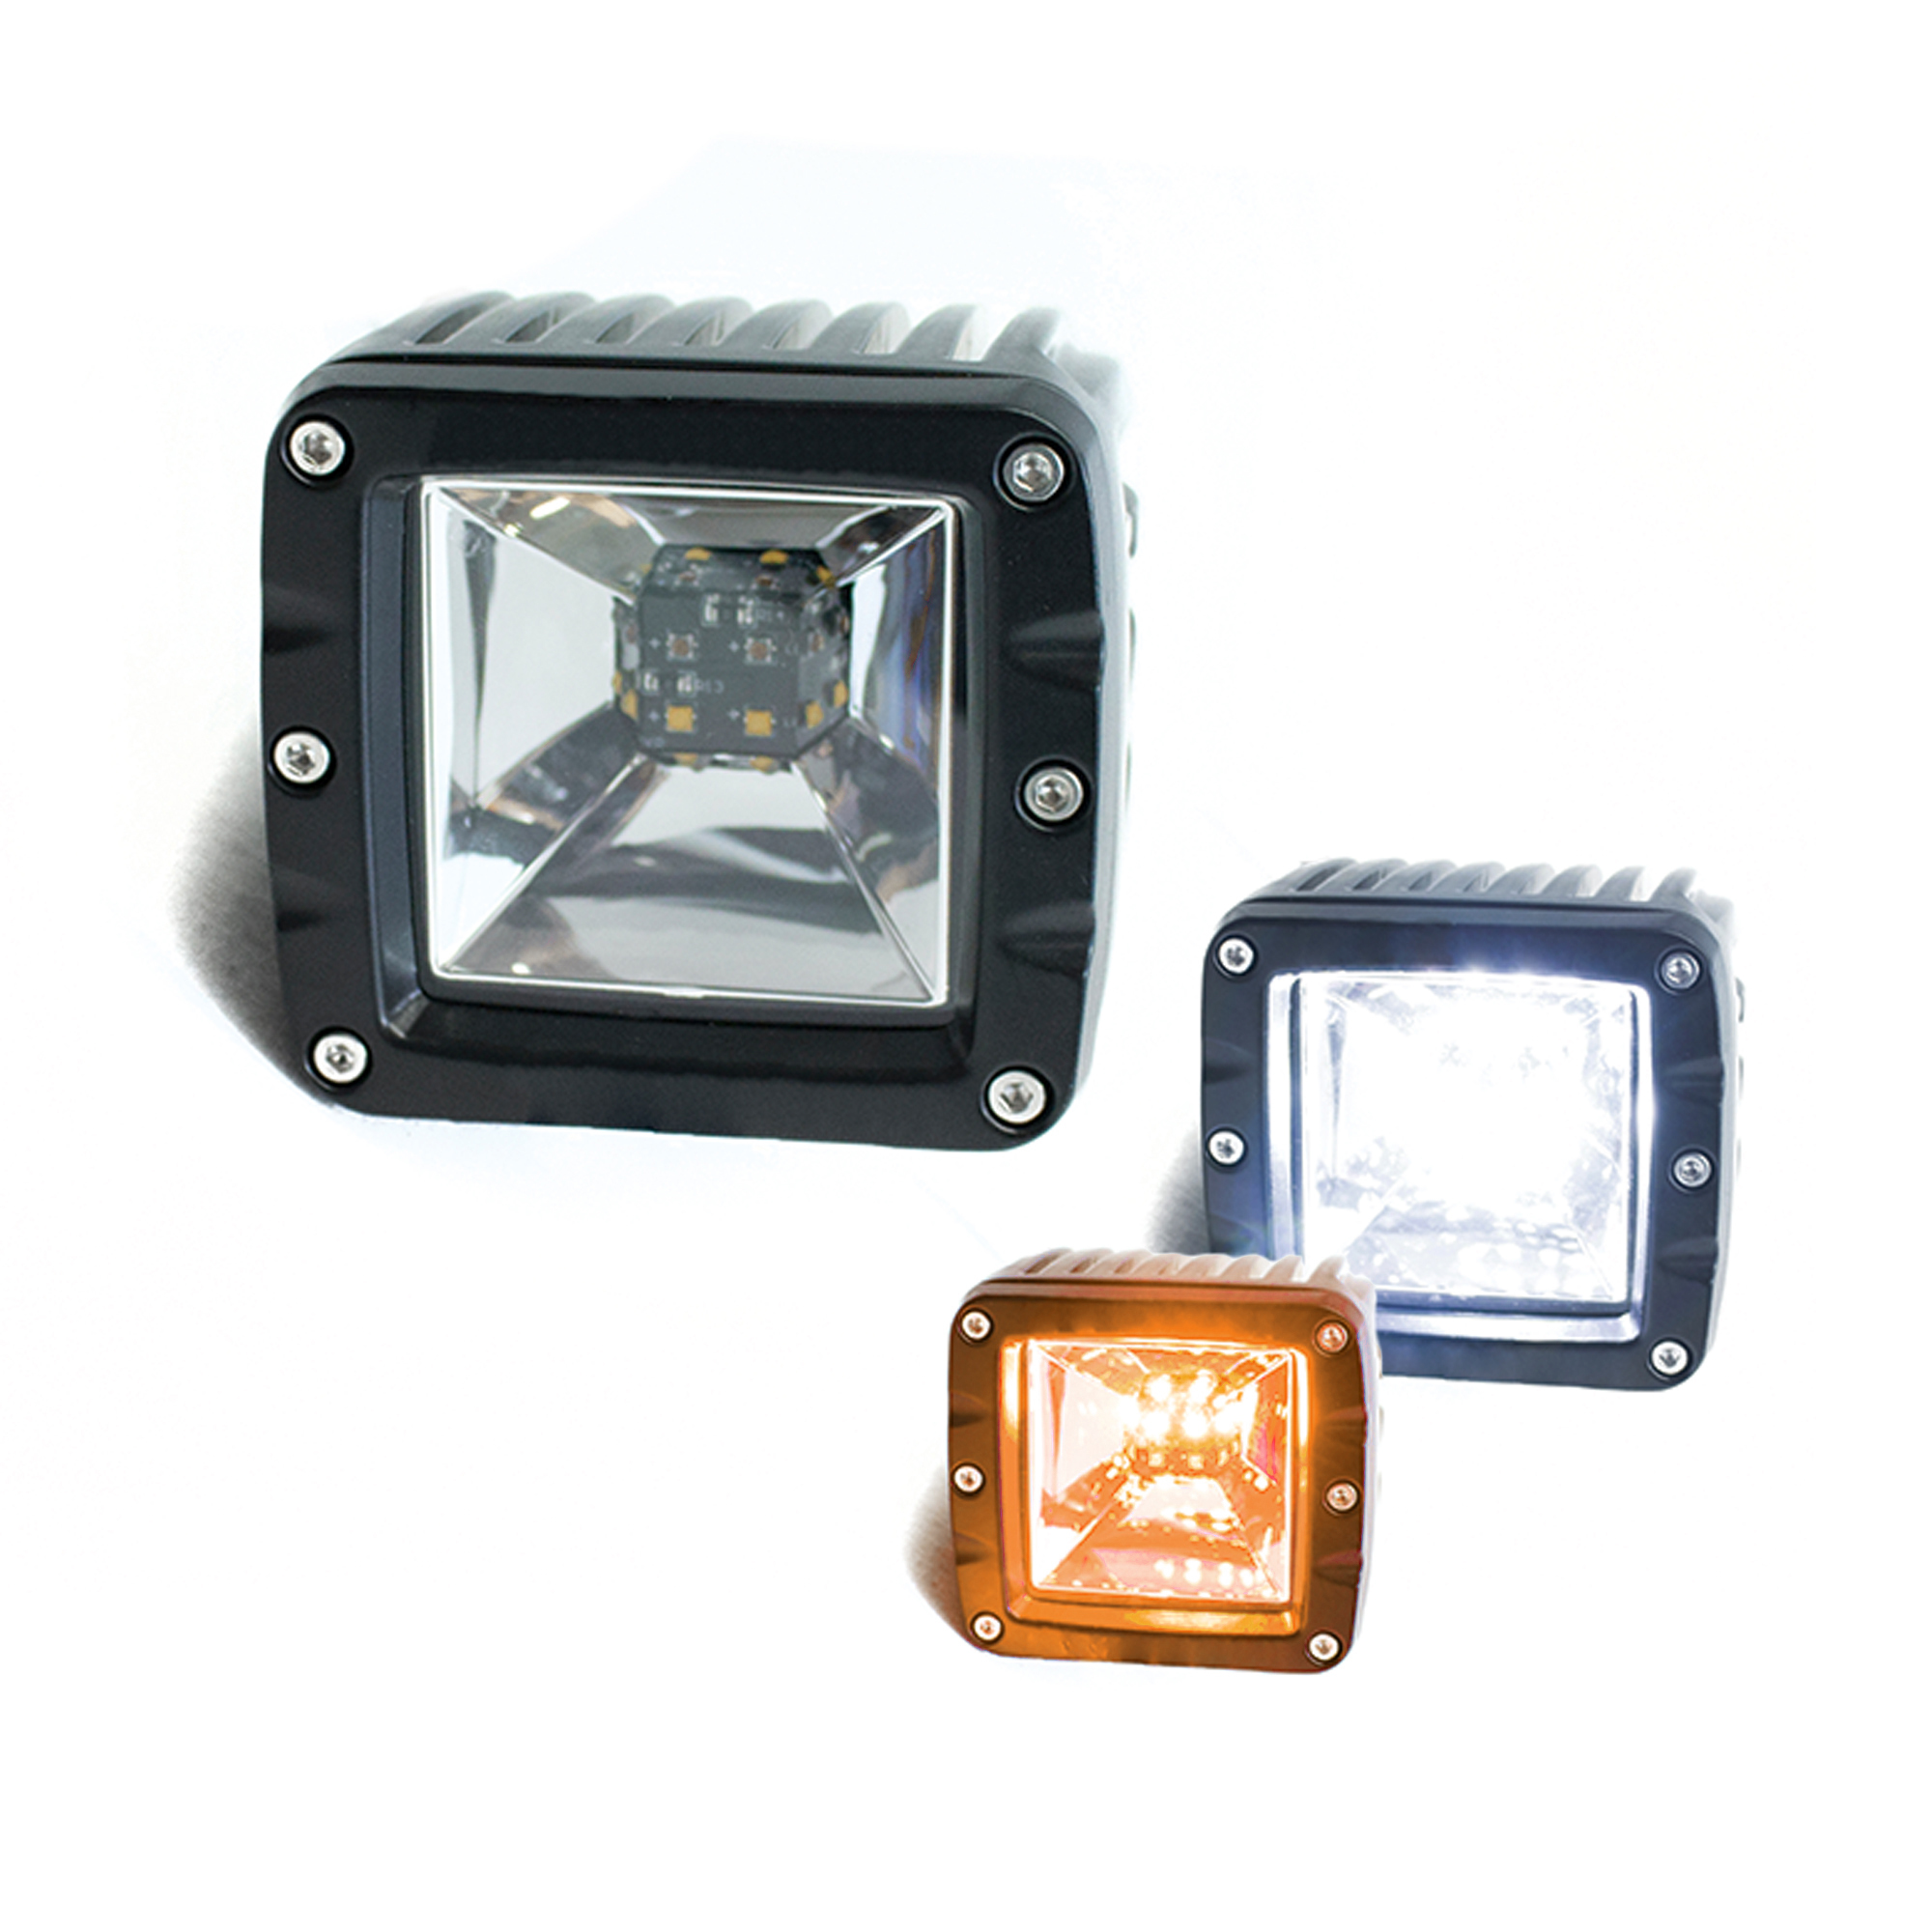 Race Sport Lighting, 3x3Inch 2-Func LED Cube Style F/Light - White/Amber, Light Type LED, Lens Color Clear, Included (qty.) 1 Model 1006474